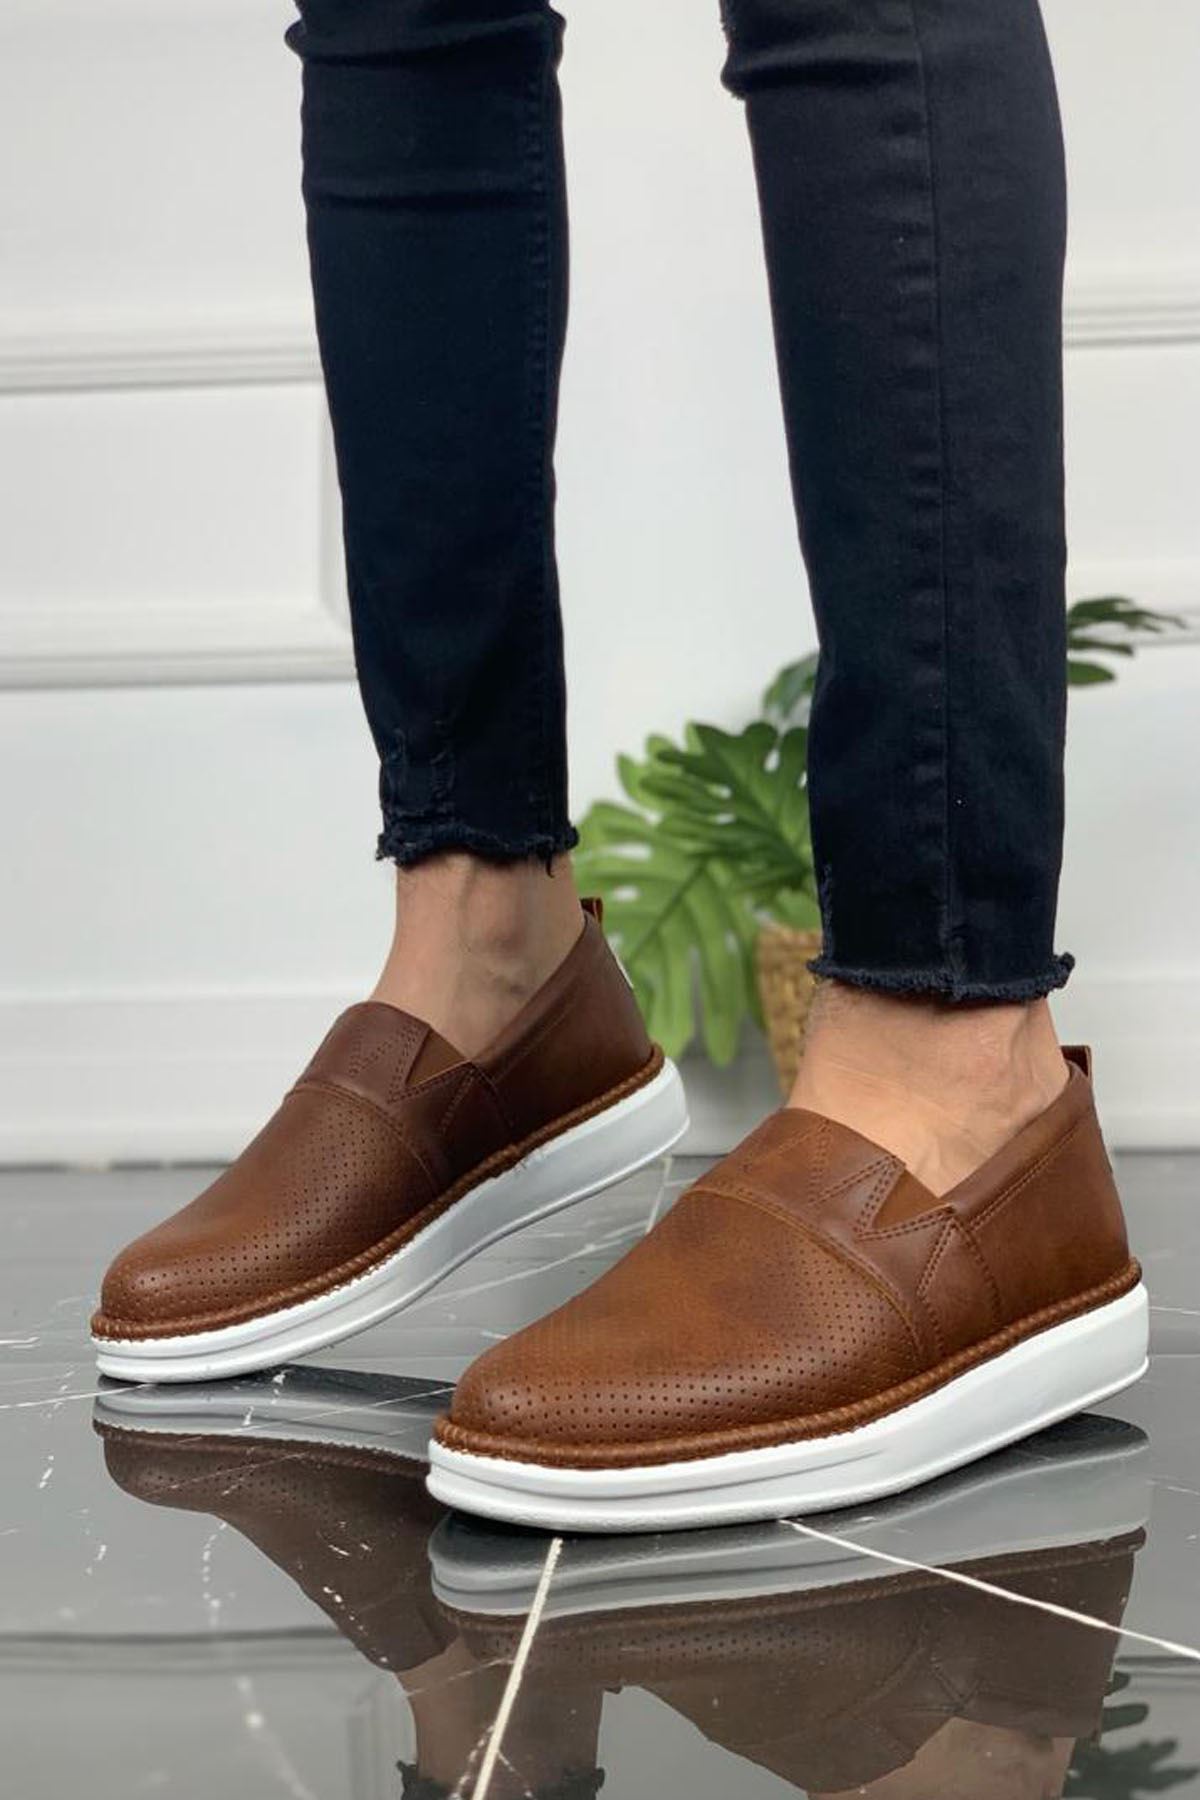 Chekich Men's Shoes Tan Color Artificial Leather Slip On Spring and Fall Seasons Sneakers Casual Brown Breathable Lightweight Luxury Comfortable White Base High Sole Gentlemen Footwear Suits Solid Walking CH091 V5